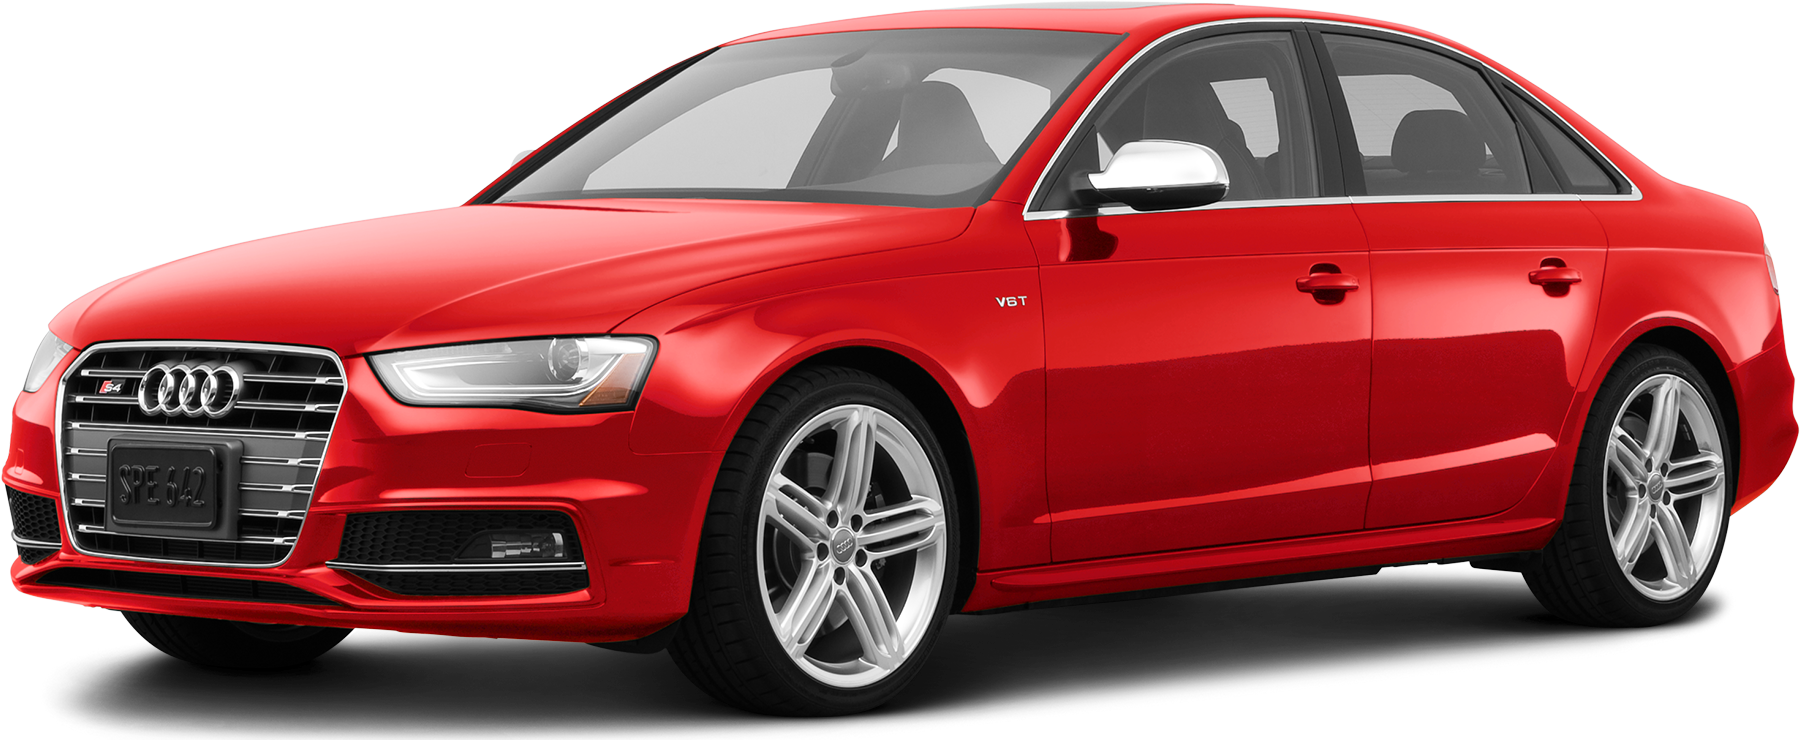 2013 Audi A6 Price, Value, Ratings & Reviews